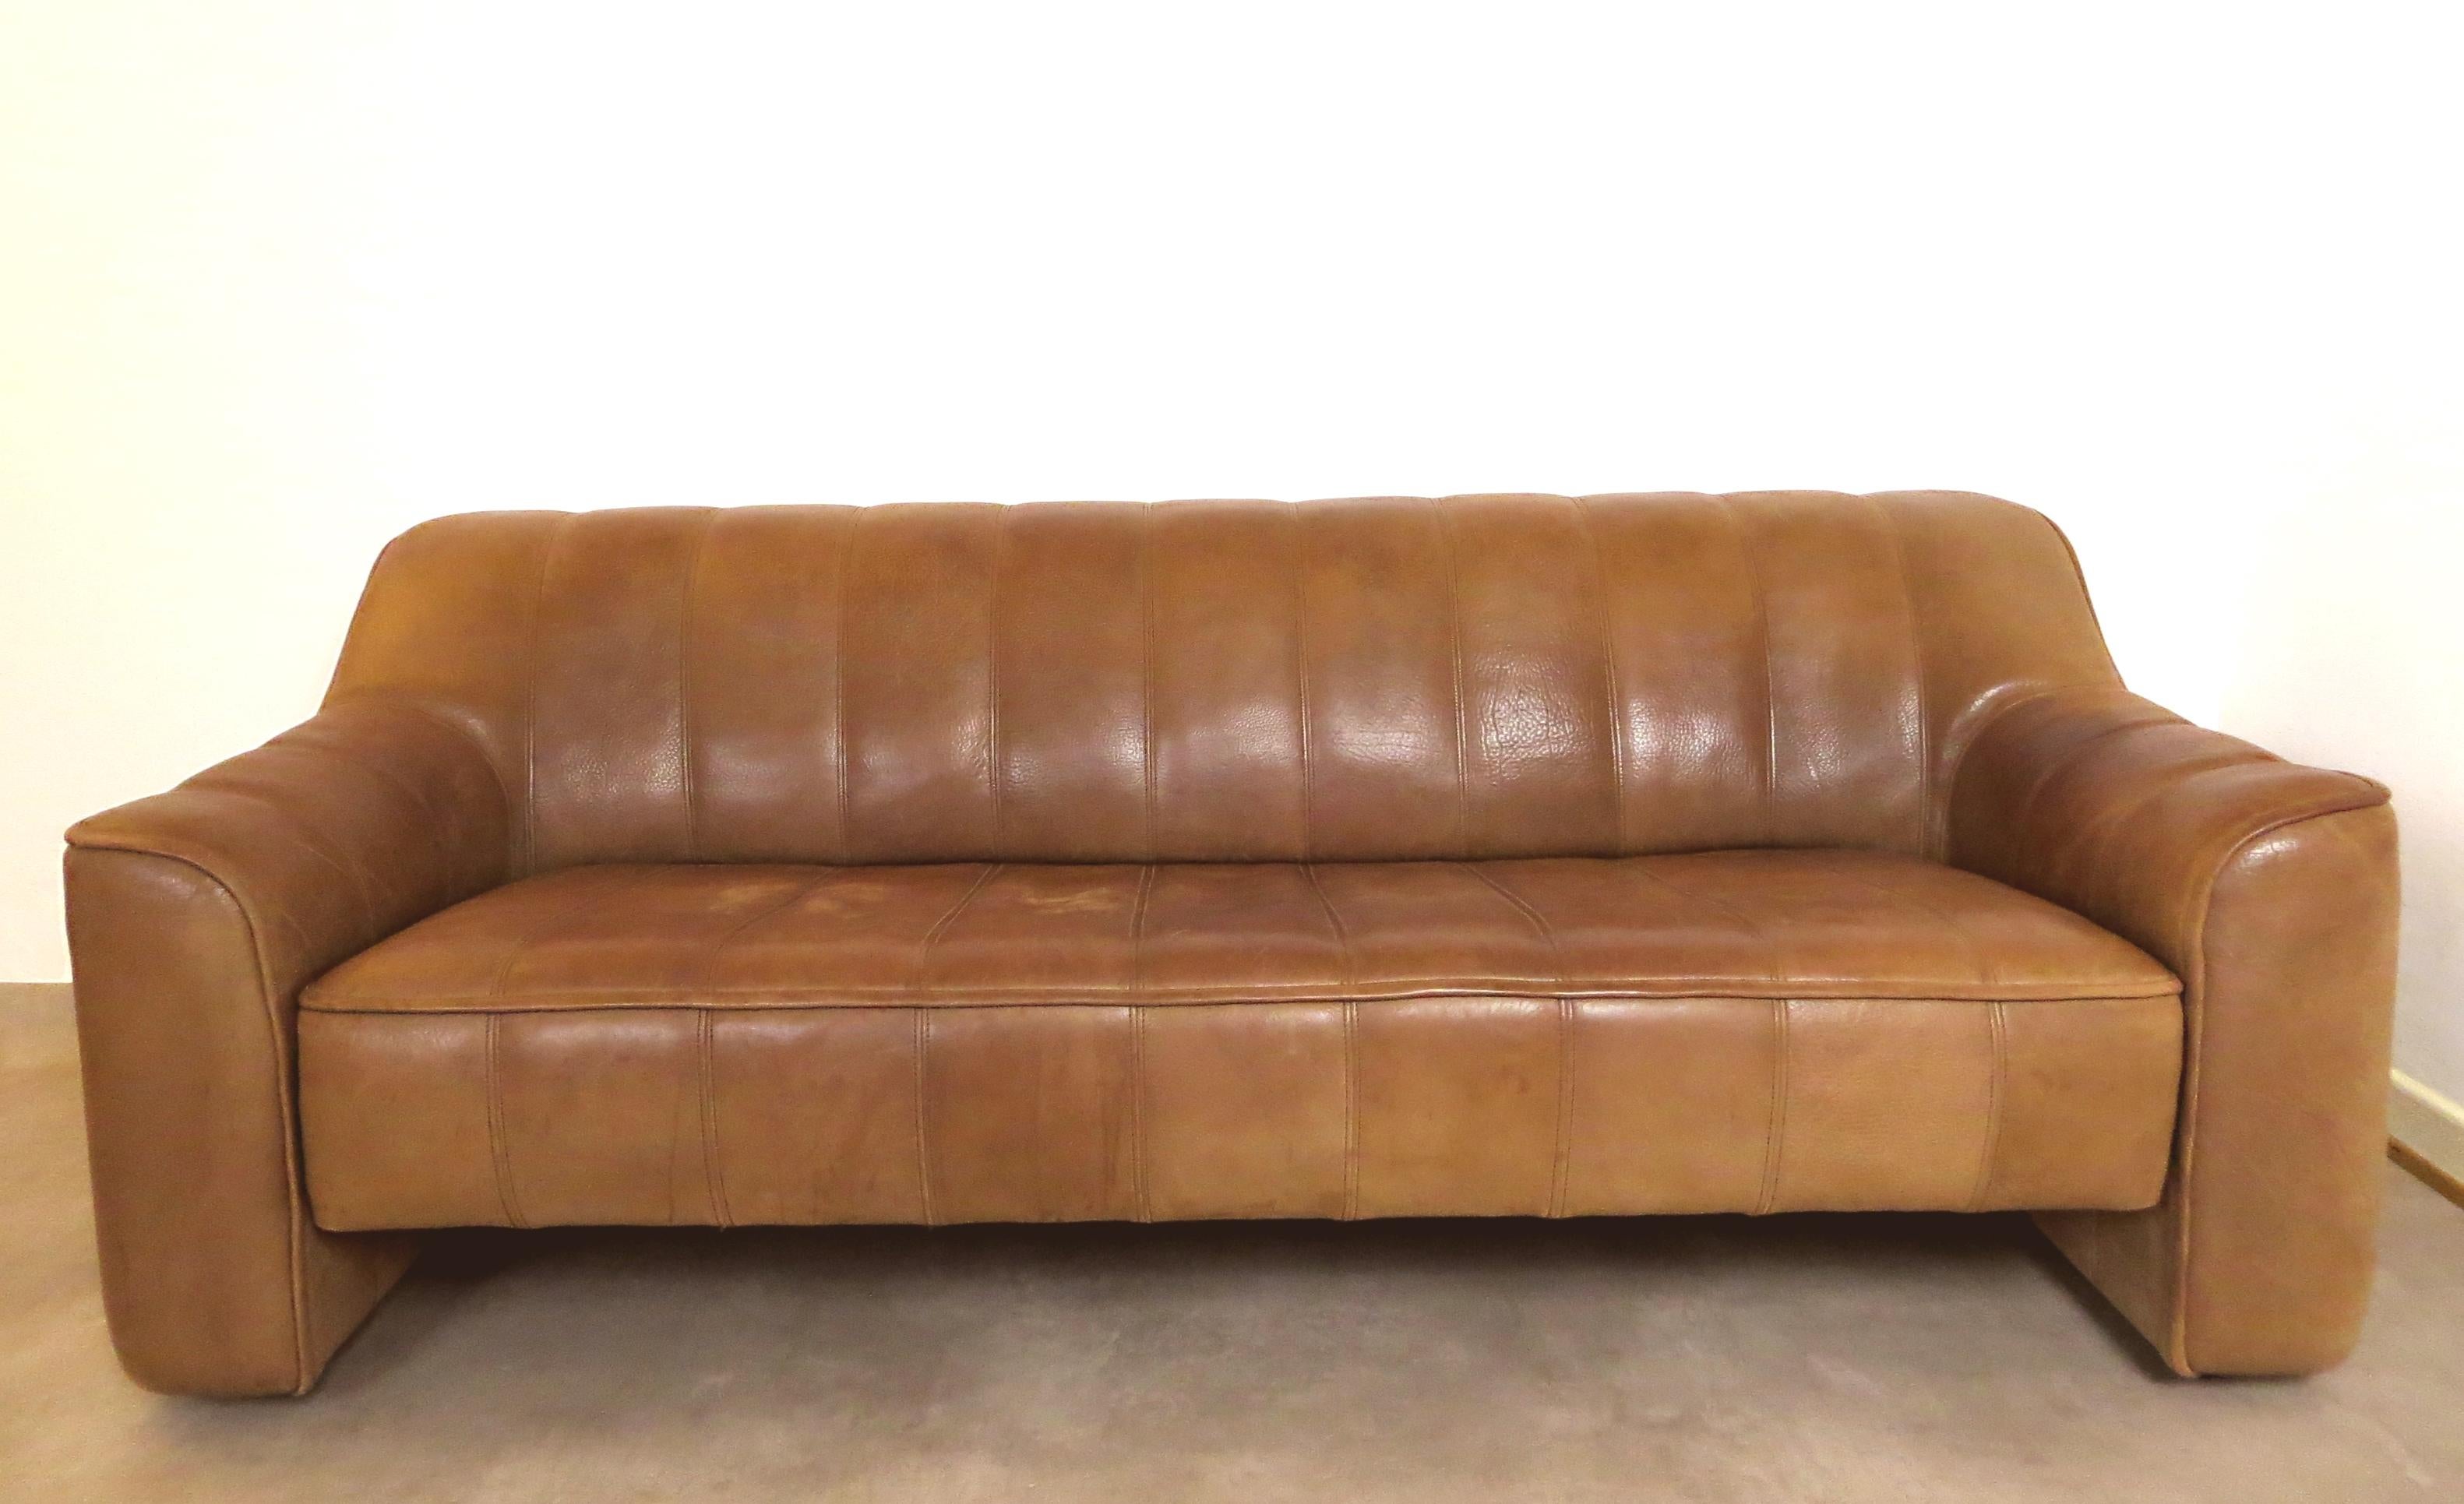 The Vintage DS 44 model is a coveted design classic designed in the Mid-Century era in late 1960s early 1970s 
by the renowned Swiss manufacturer and luxury brand de Sede.

+ Perfect craftsmanship
+This lounge leather sofa by De Sede can be extended